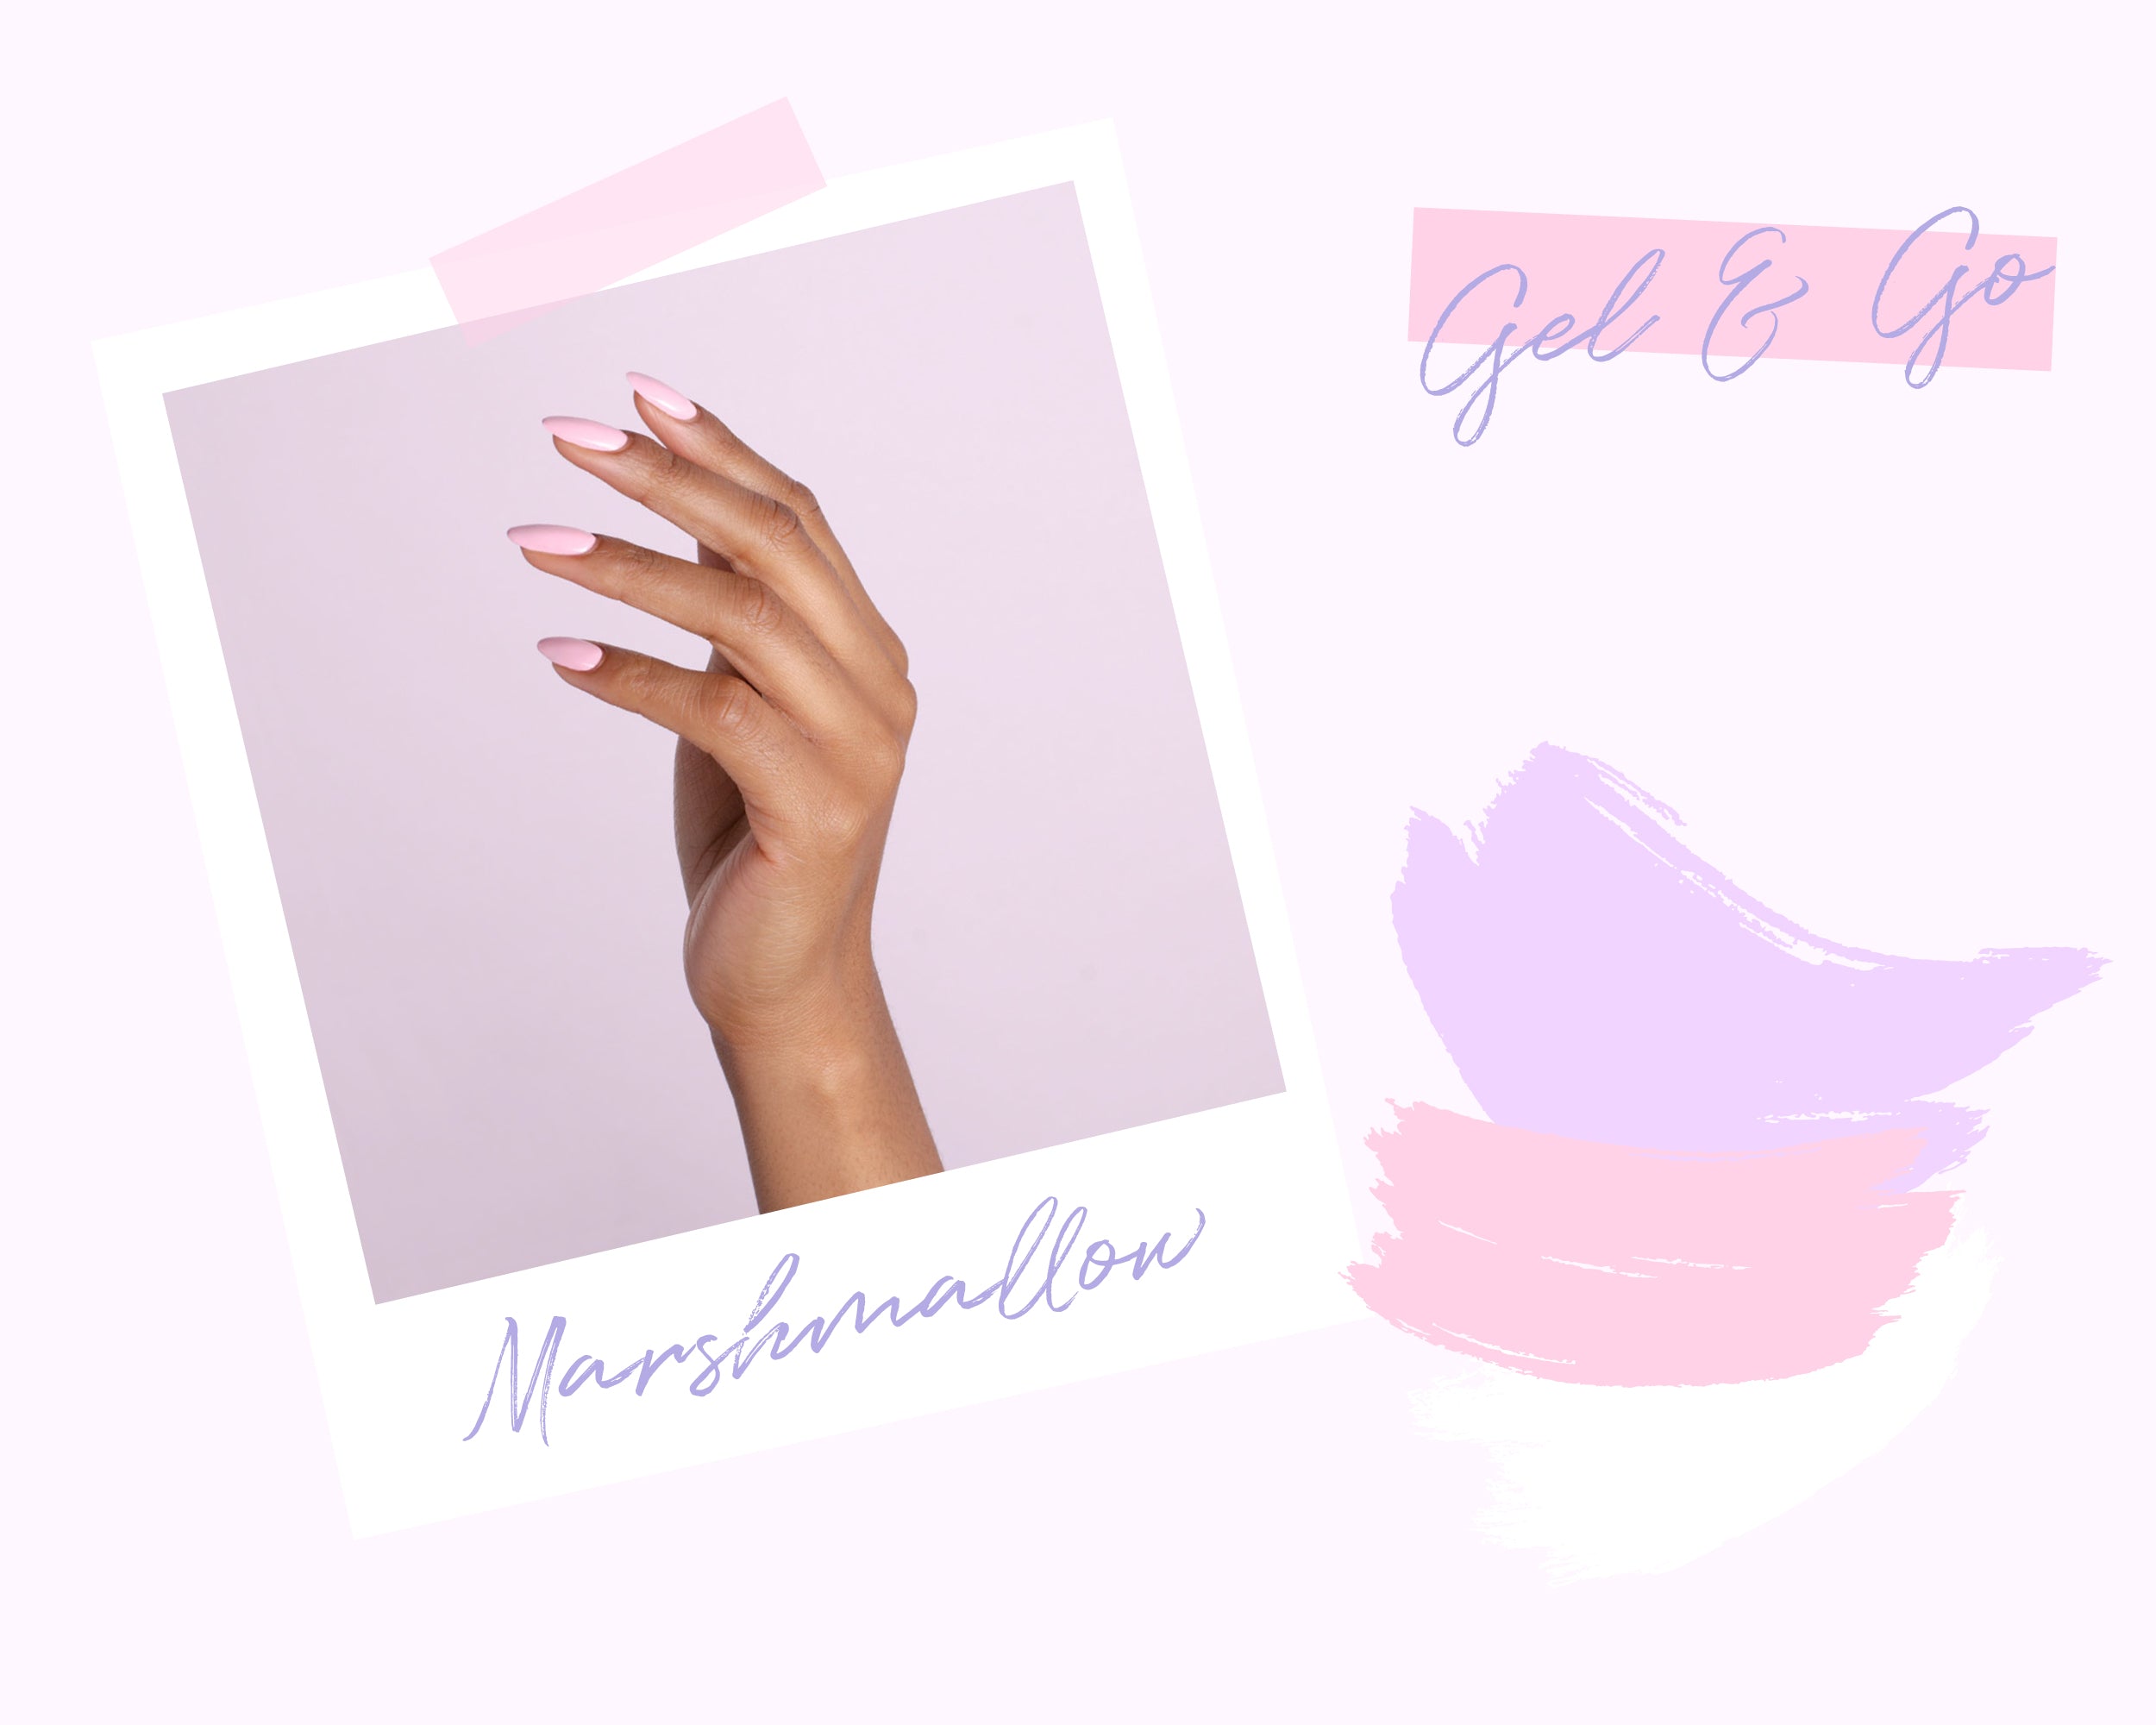 Gel and Go Marshmallow